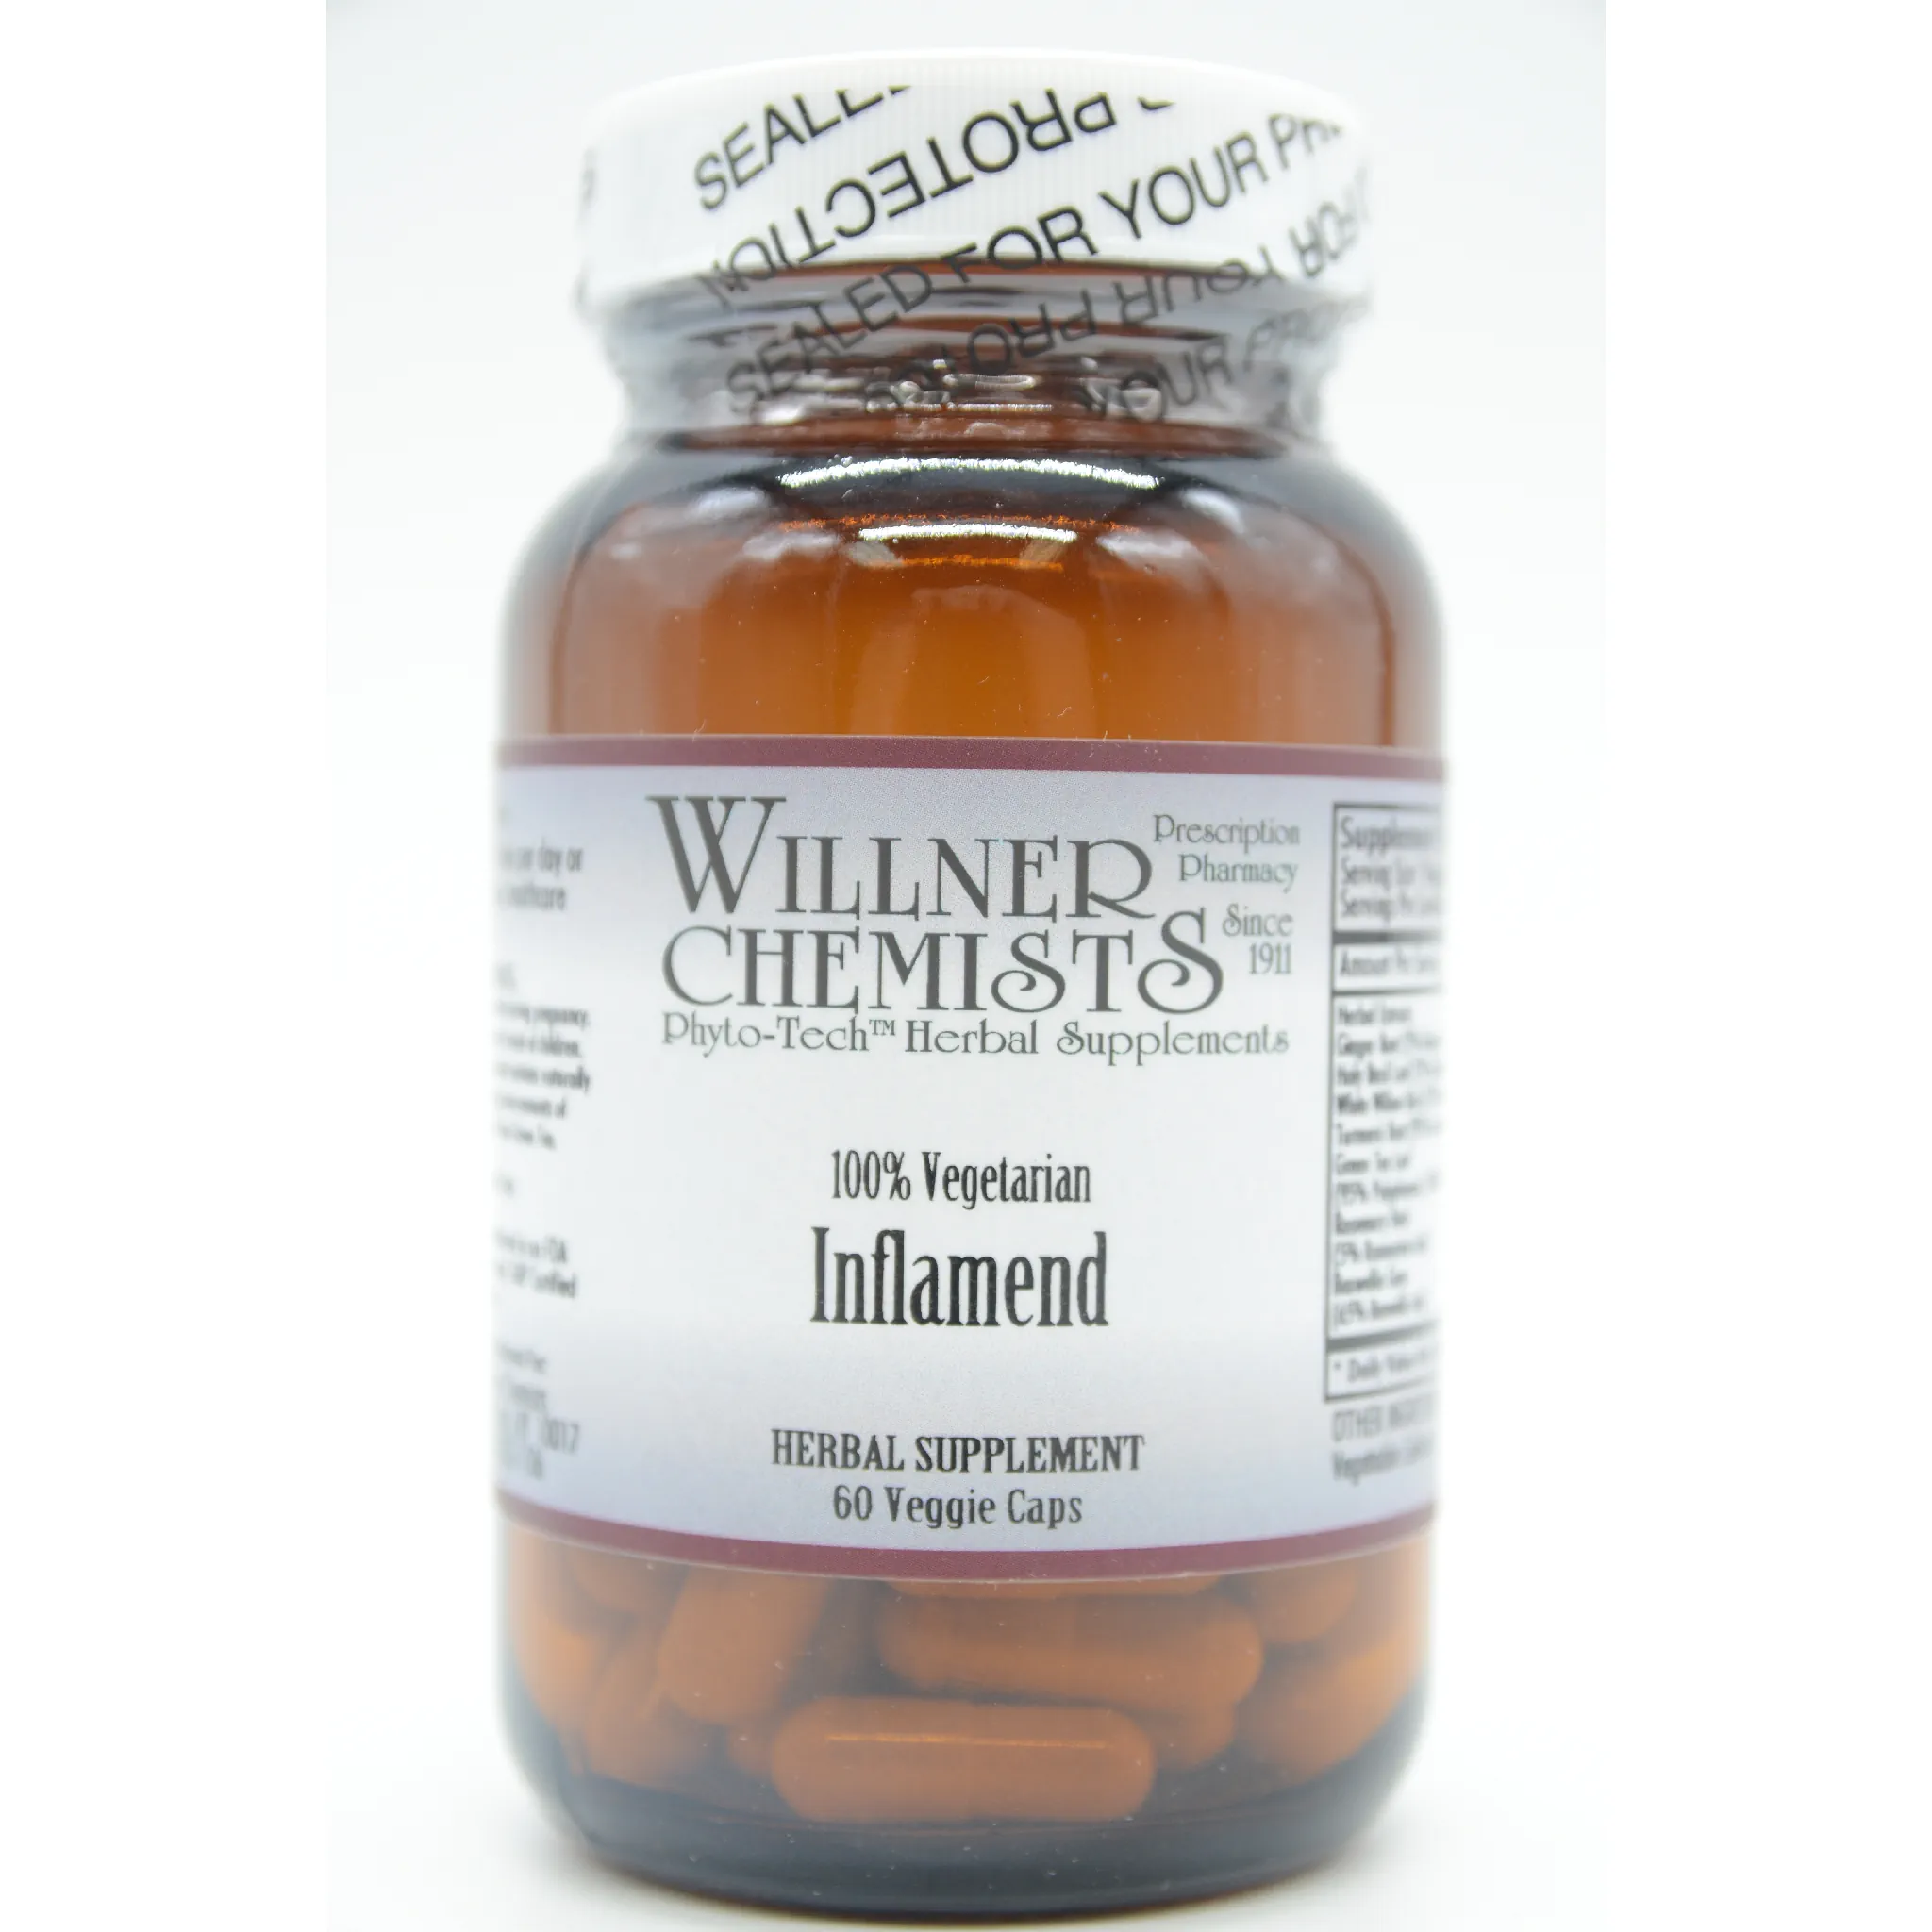 Willner Phyto Tech - Inflamend vCap